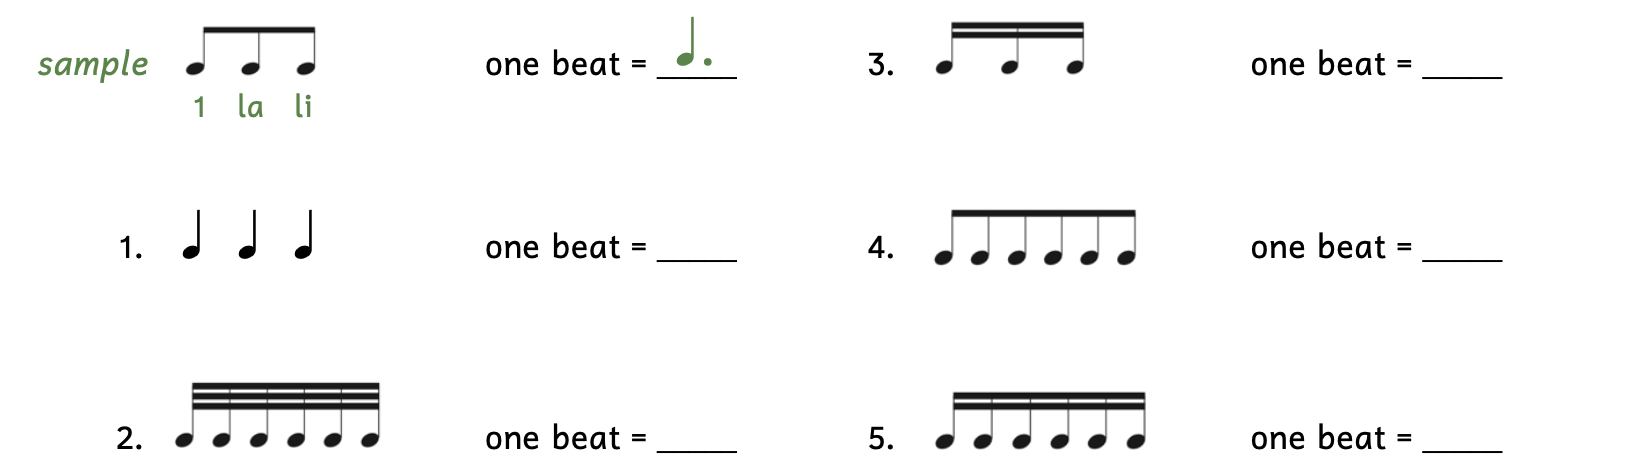 Exercise identifying which dotted note equals the given divisions and subdivisions. The sample shows three eighth notes beamed together. The answer is that one beat equals a dotted quarter note. The rhythm syllables below the three eighth notes are "1, lah, lee." Number 1 shows 3 quarter notes. Number 2 shows 6 thirty-second notes. Number 3 shows 3 sixteenth notes. Number 4 shows 6 eighth notes. Number 5 shows 6 sixteenth notes.